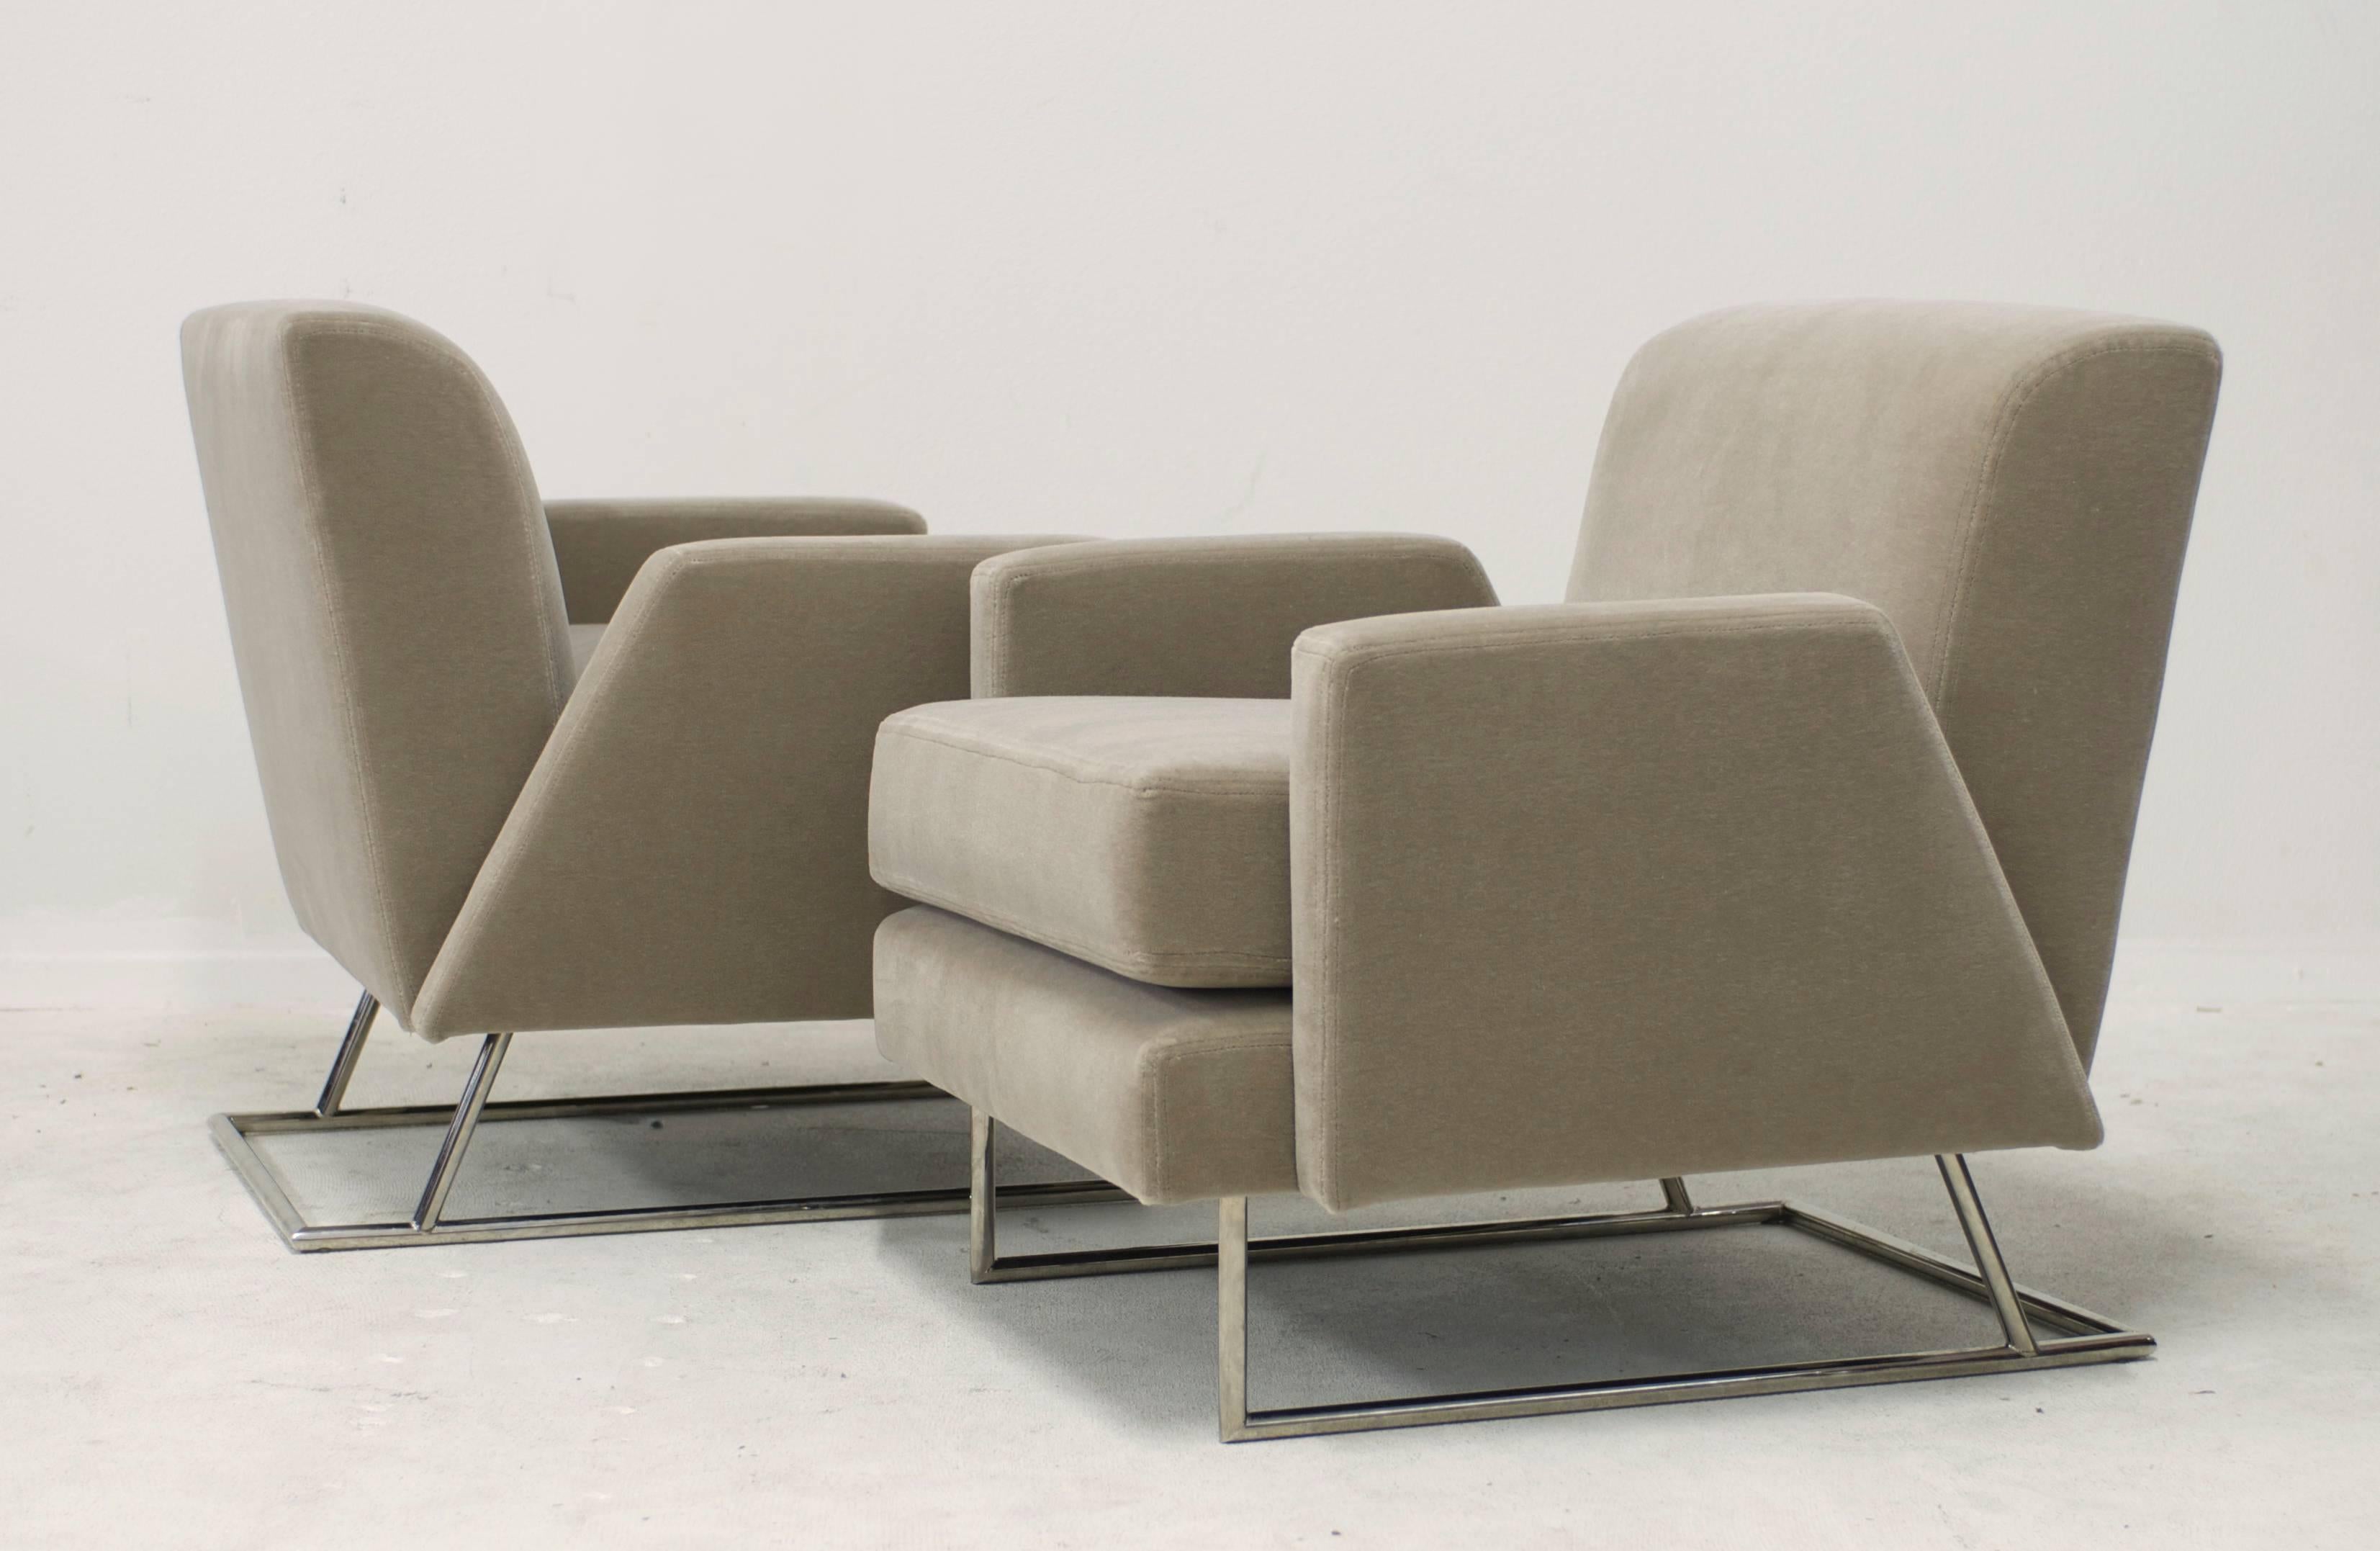 In the style of Paul Tuttle this post modern pair of lounge chairs have been reupholstered in a luxe very light sage colored mohair. It's like a champagne color with a slightest hint of olive. The polished steel bases have a nice sculptural angle at